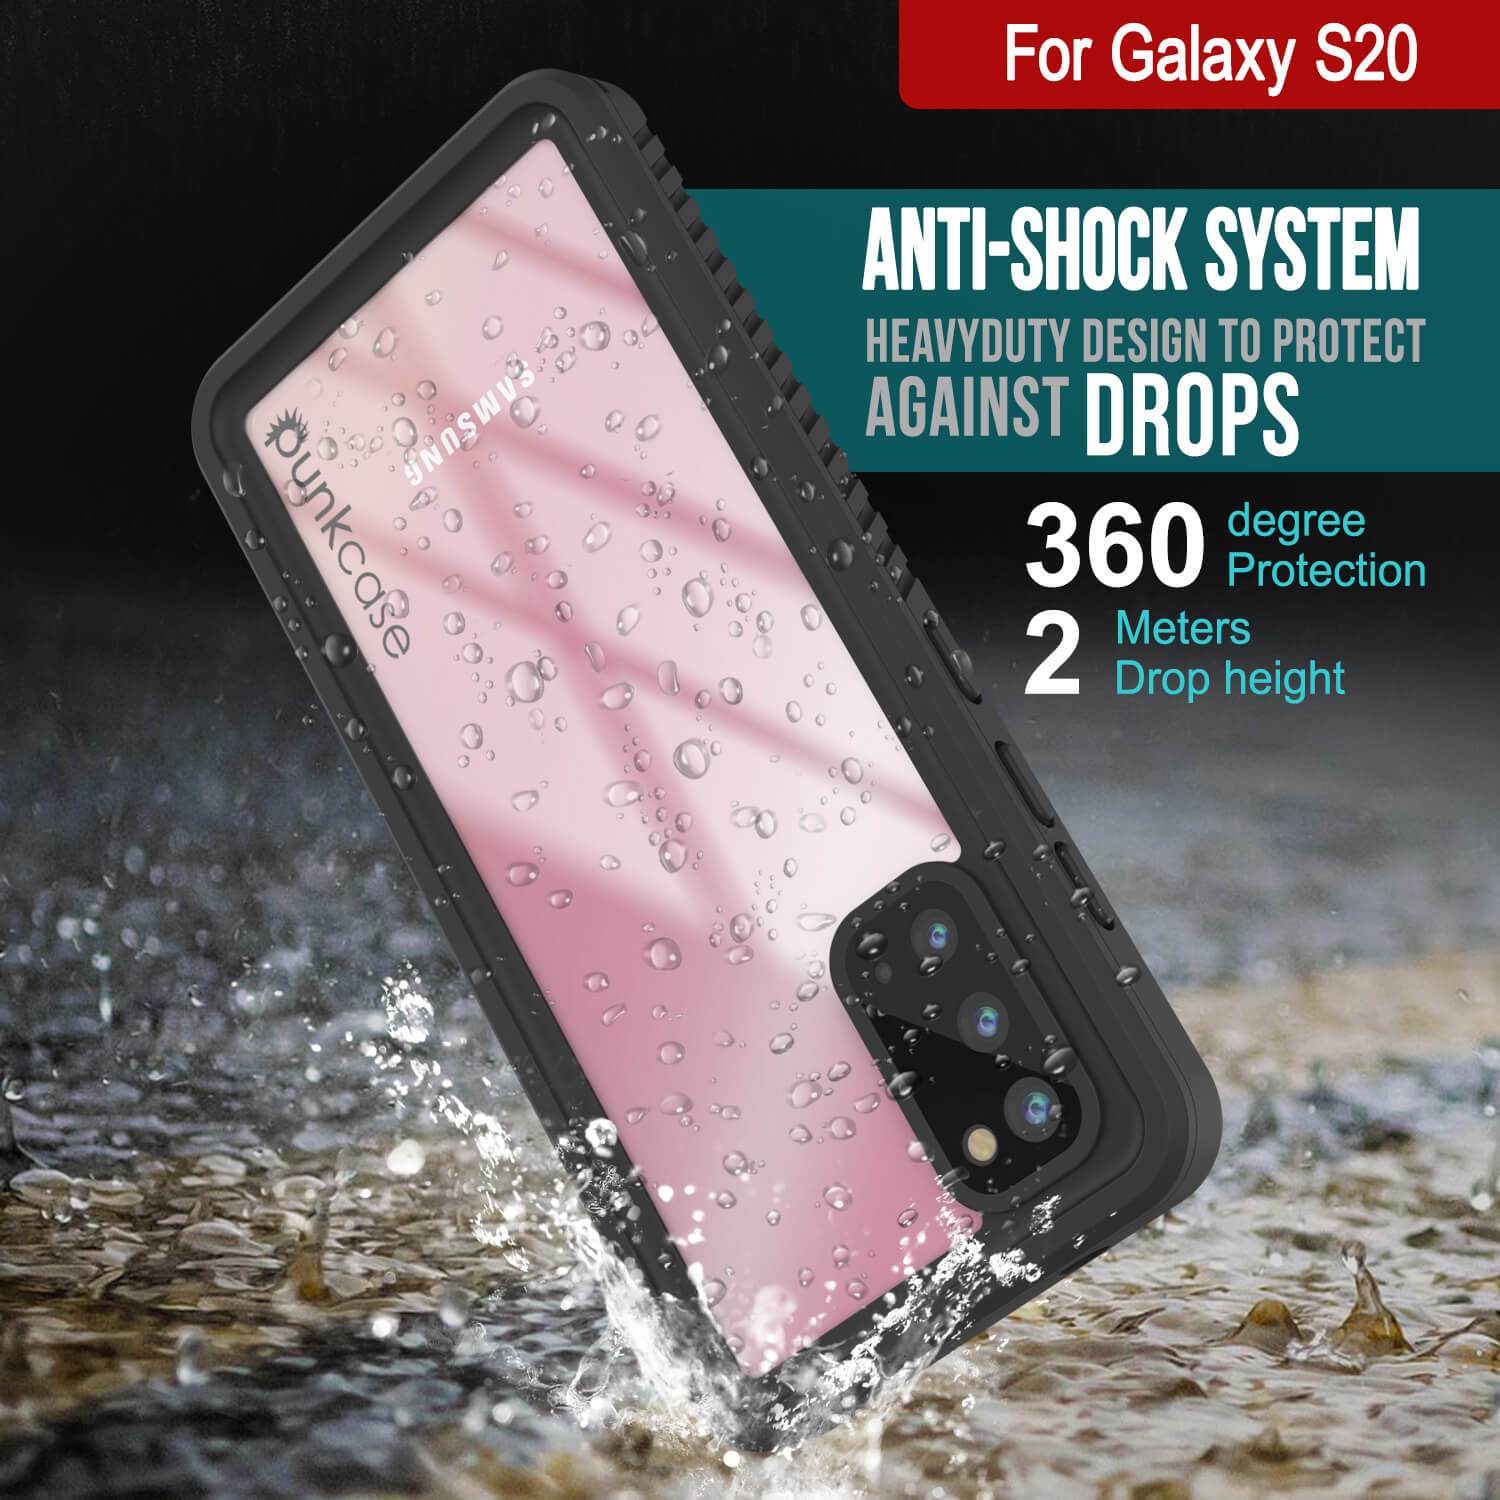 Galaxy S20 Water/Shockproof [Extreme Series] Screen Protector Case [Light Green]